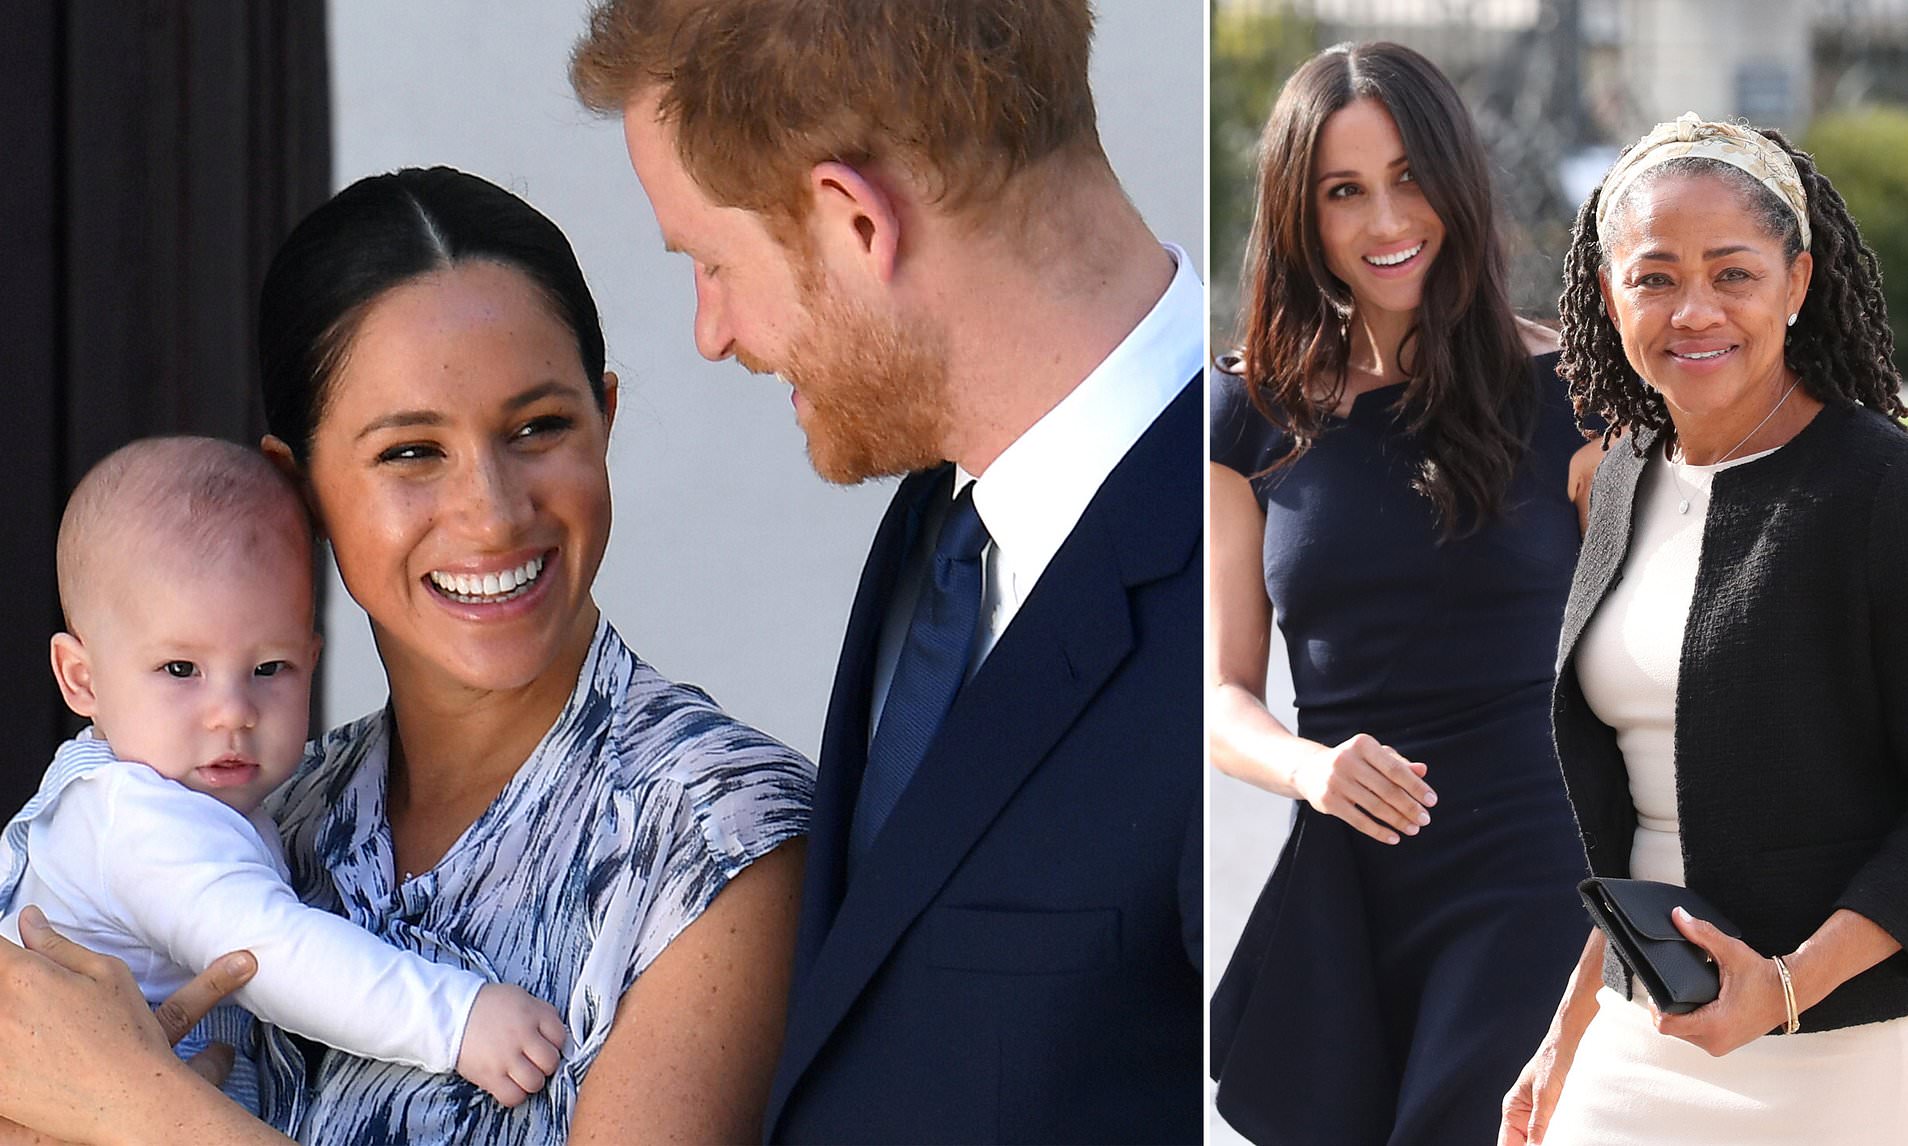 Meghan Markle and Prince Harry spent Thanksgiving with ‘close family’ on a ‘long trip to Meghan’s home in the US’, royal correspondents reveal